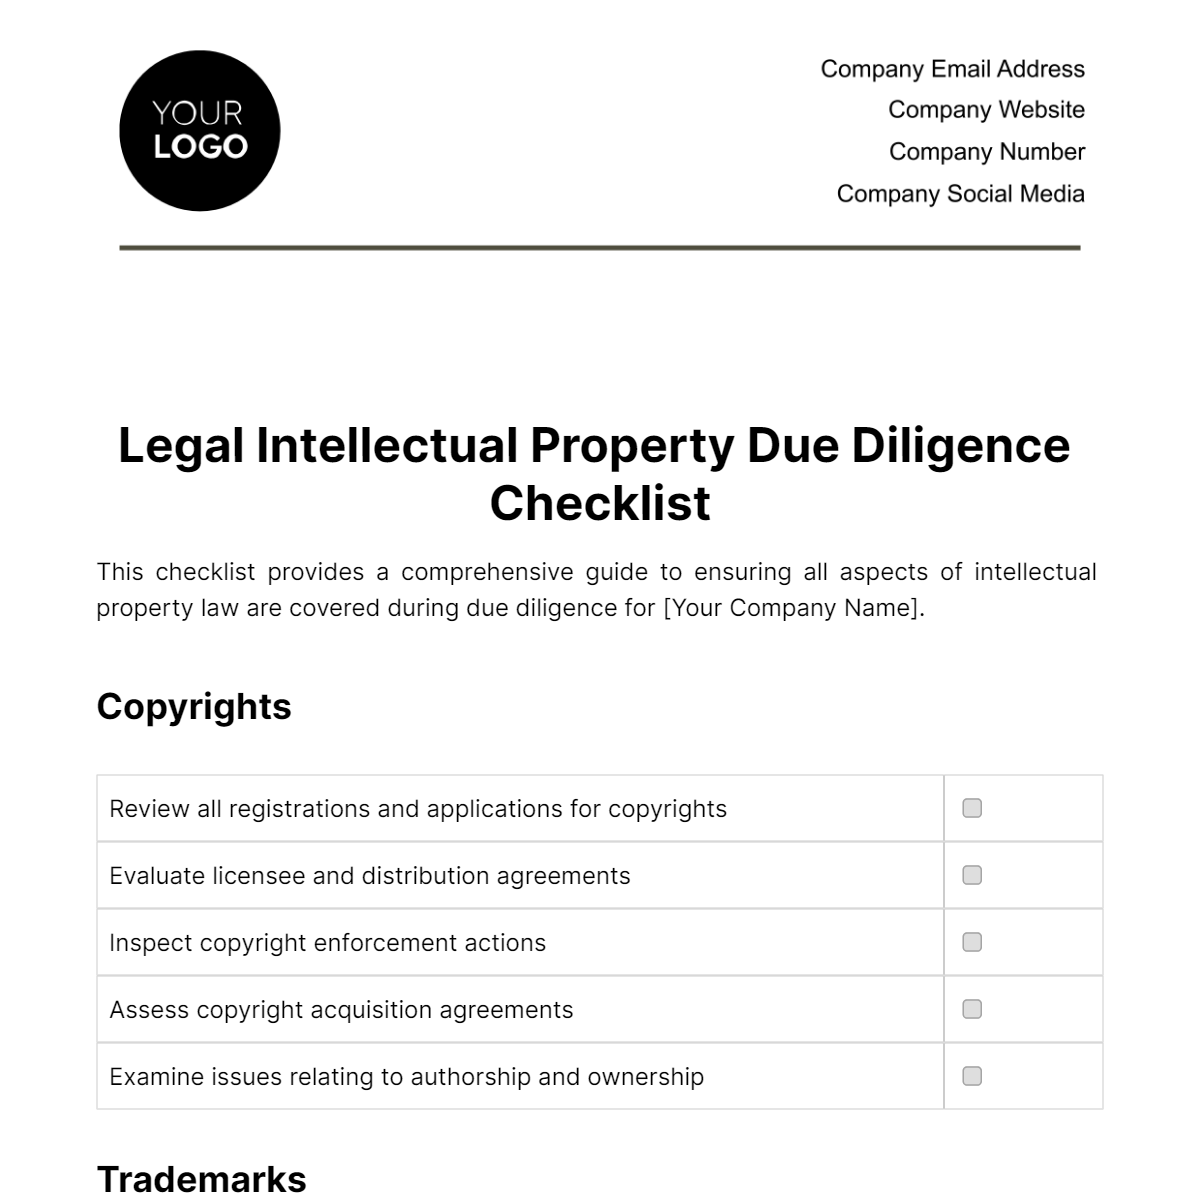 Legal Intellectual Property Due Diligence Checklist Template